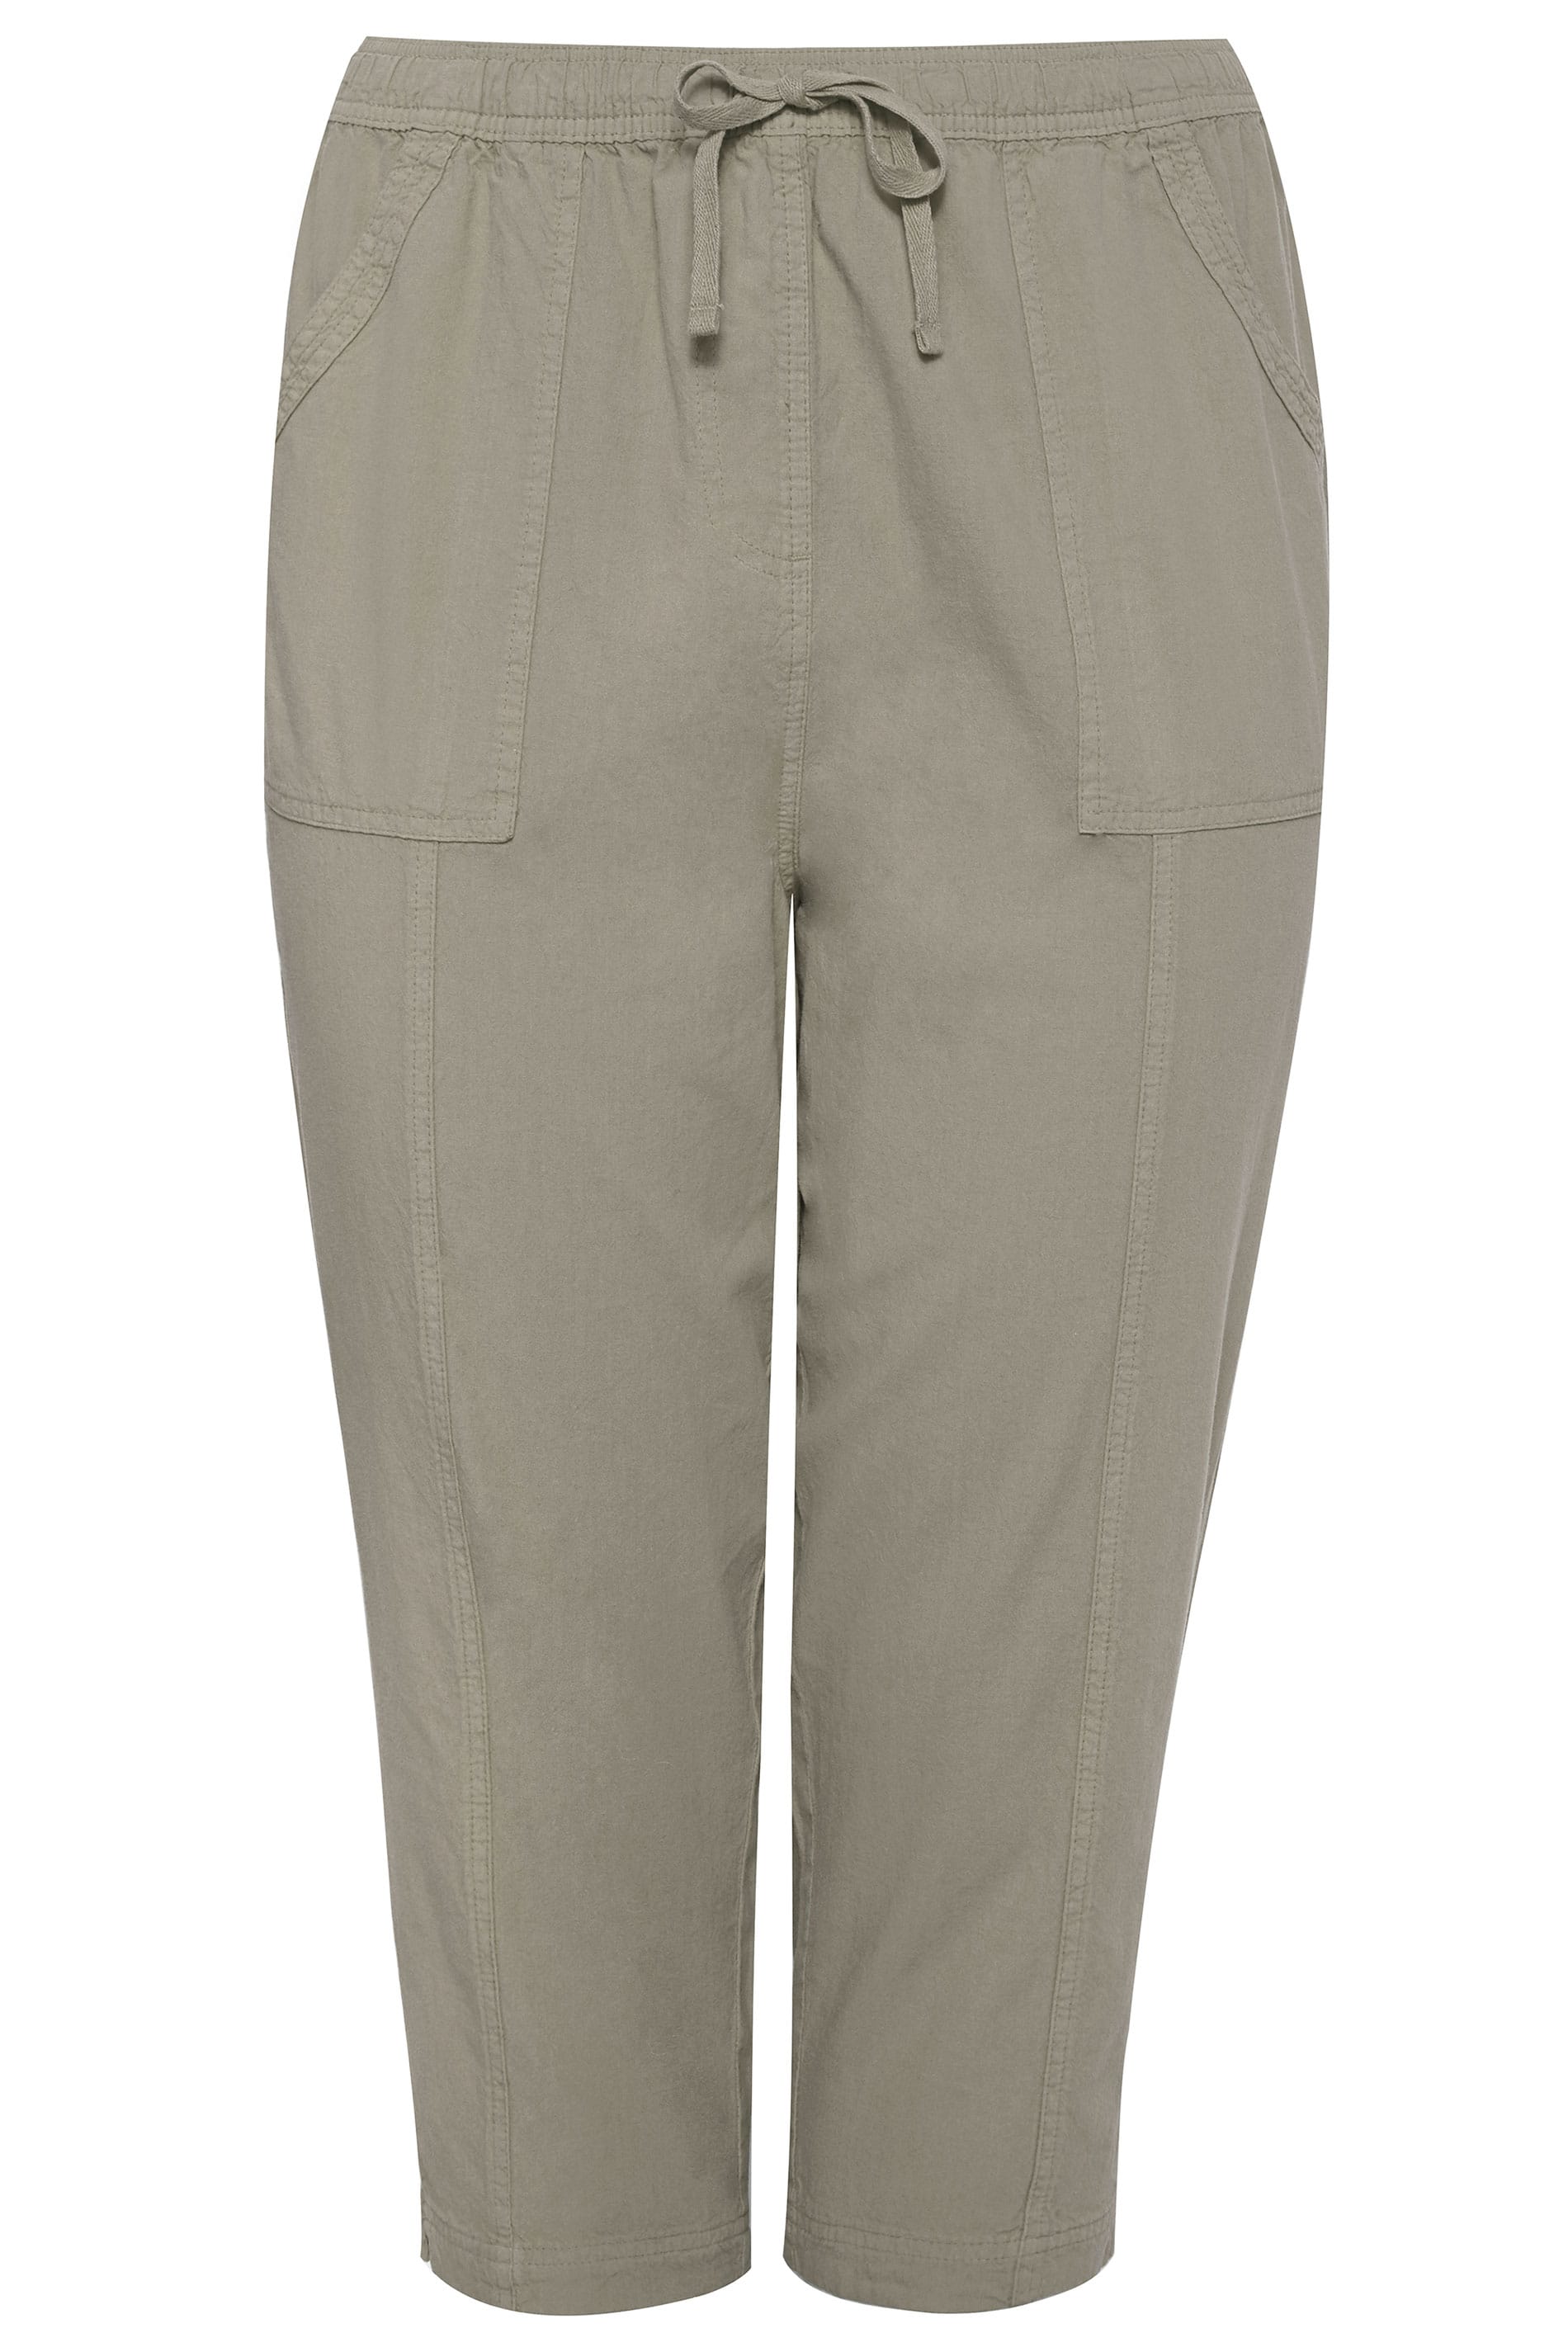 Sage Green Cool Cotton Cropped Trousers | Plus Sizes 16 to 36 | Yours ...